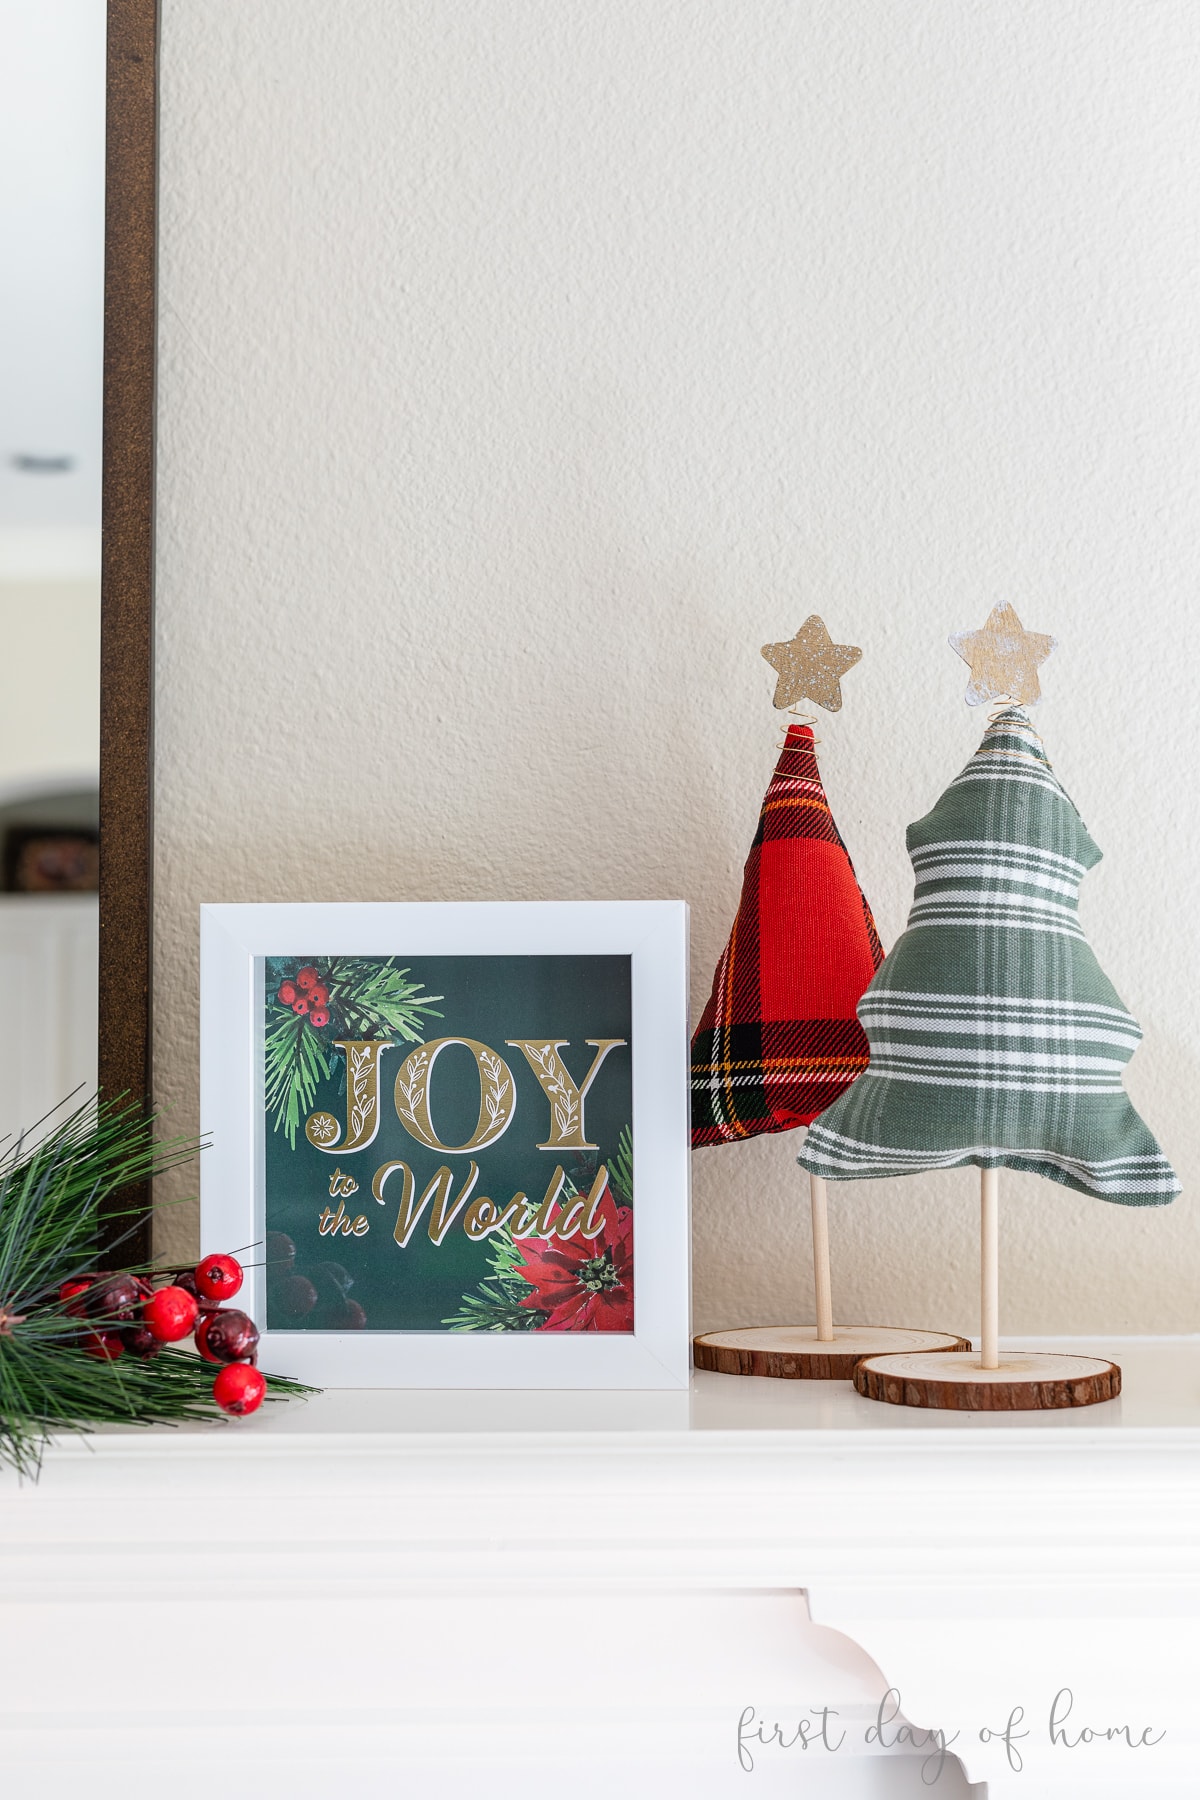 Christmas shadow box that reads "Joy to the World" shown with fabric Christmas trees and faux evergreen stem and berries.